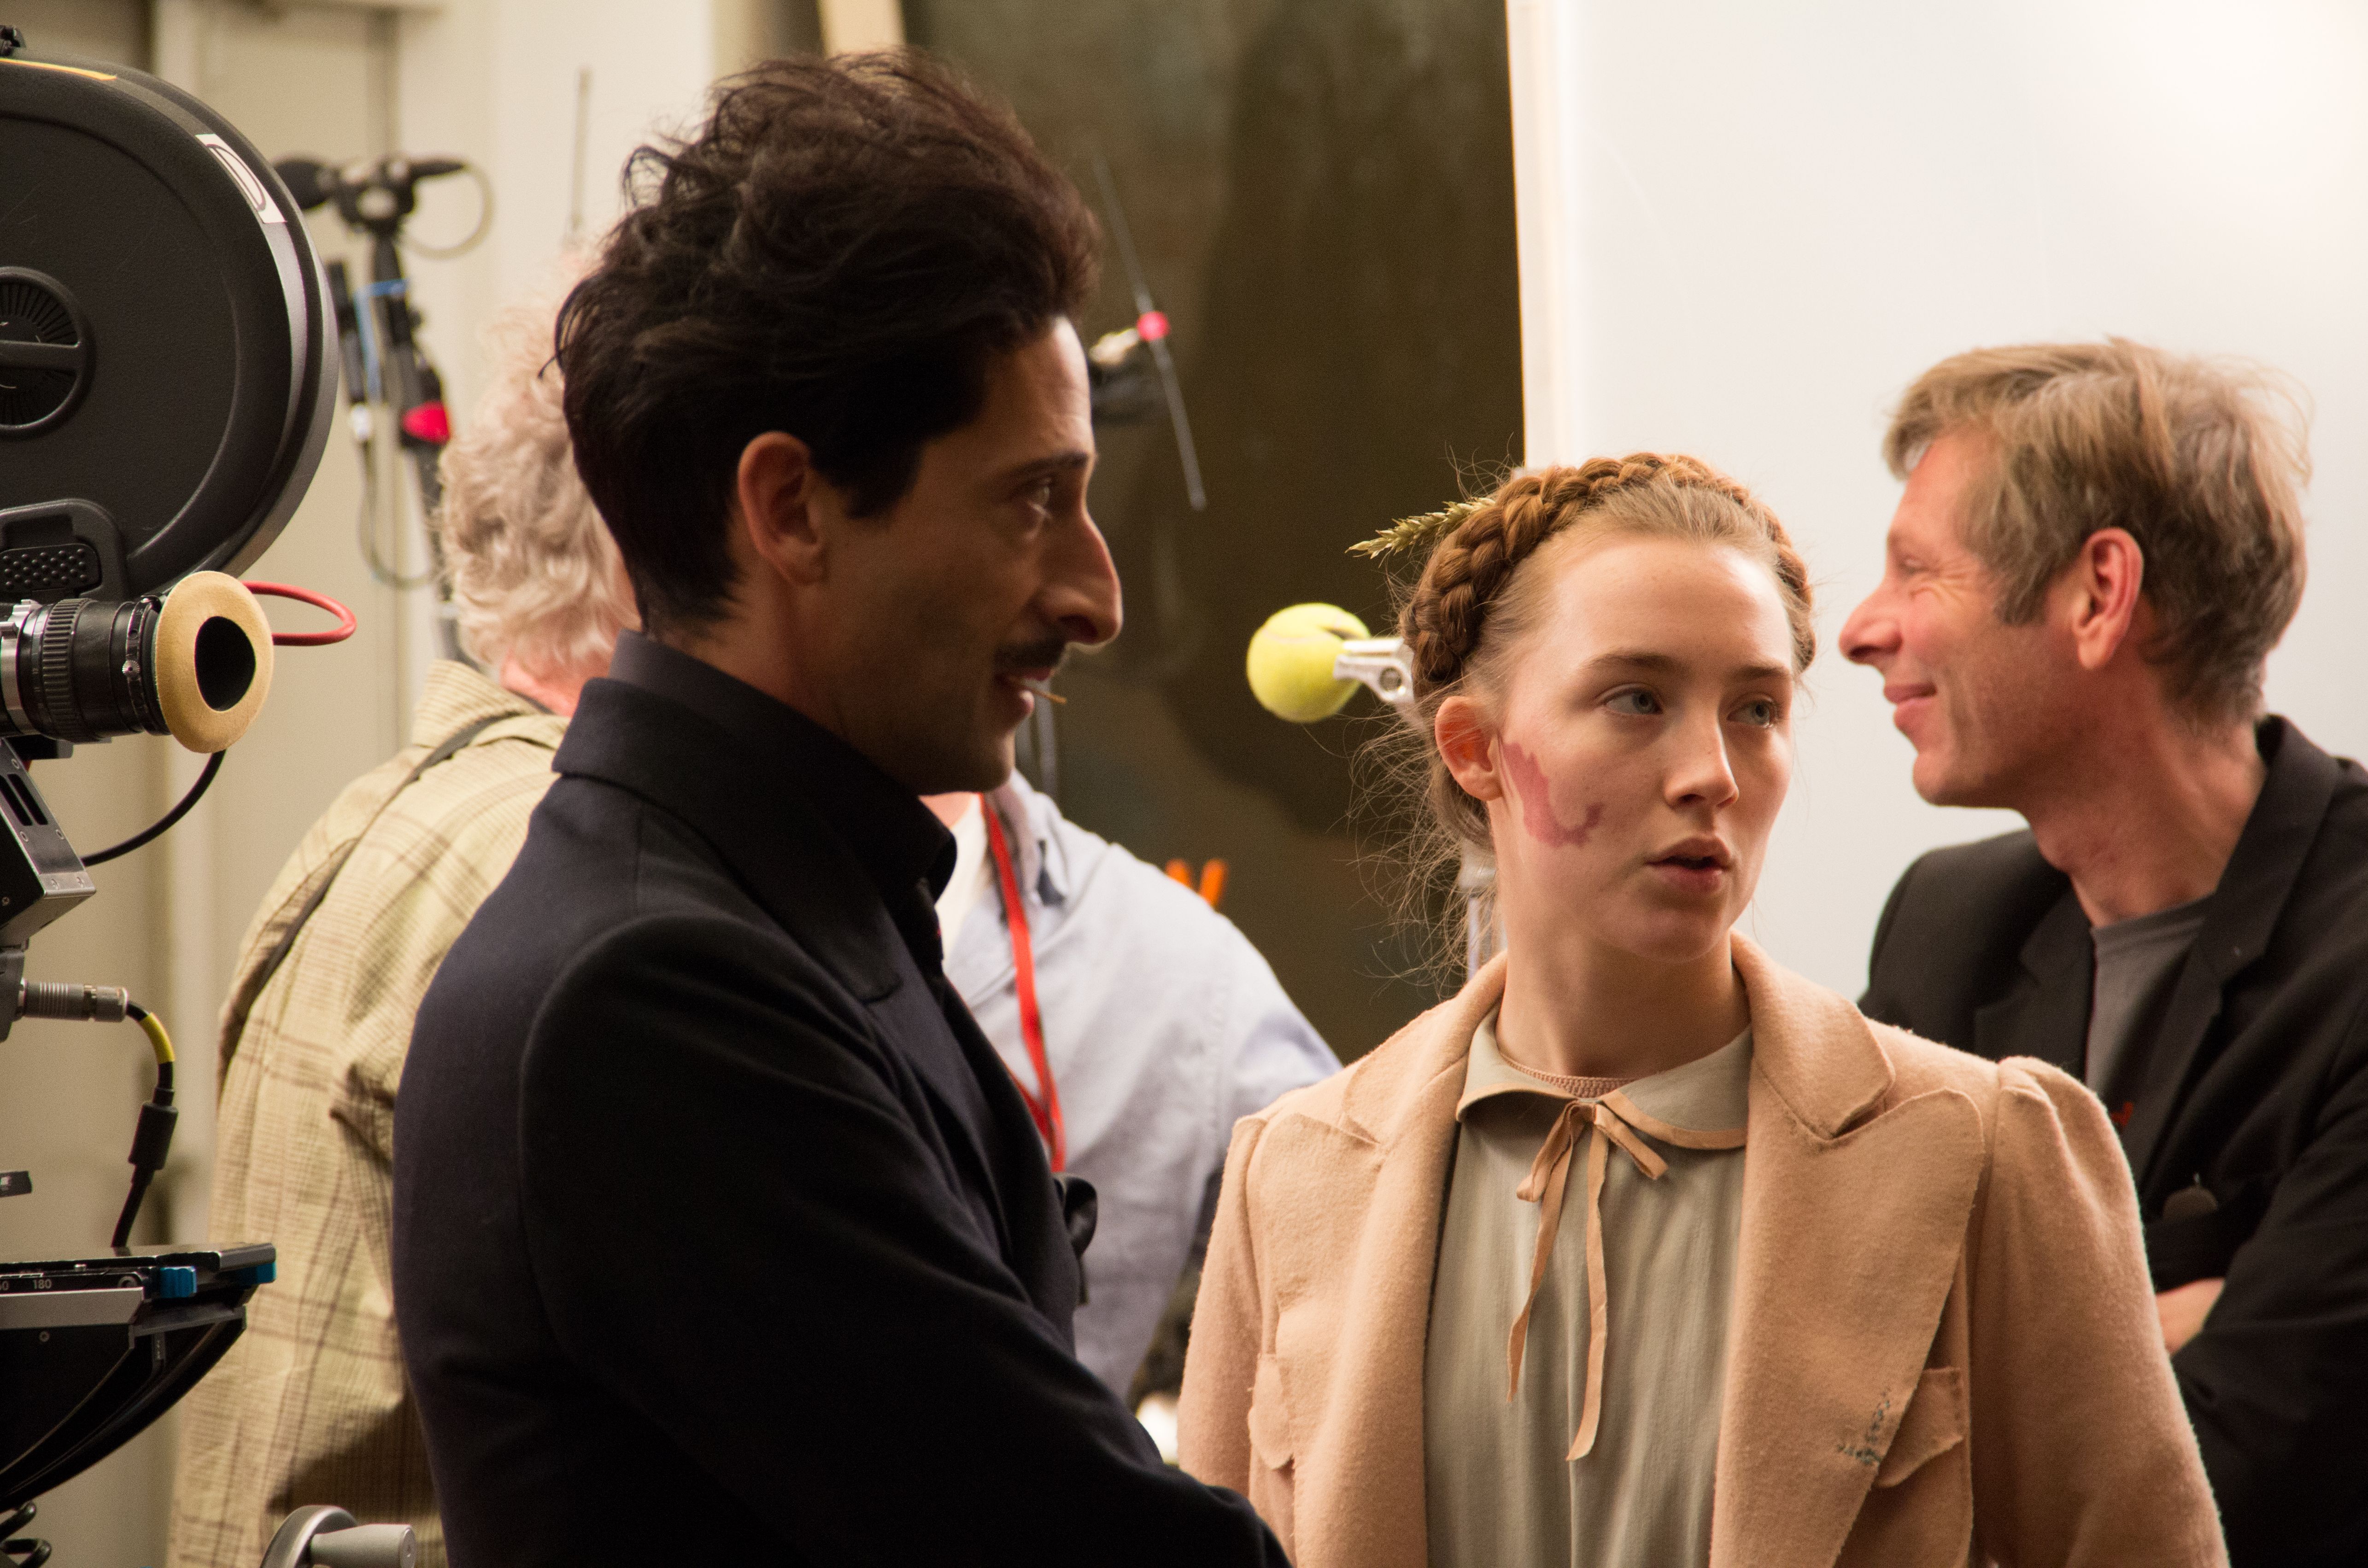 Adrien Brody and Saoirse Ronan behind the scenes of The Gran